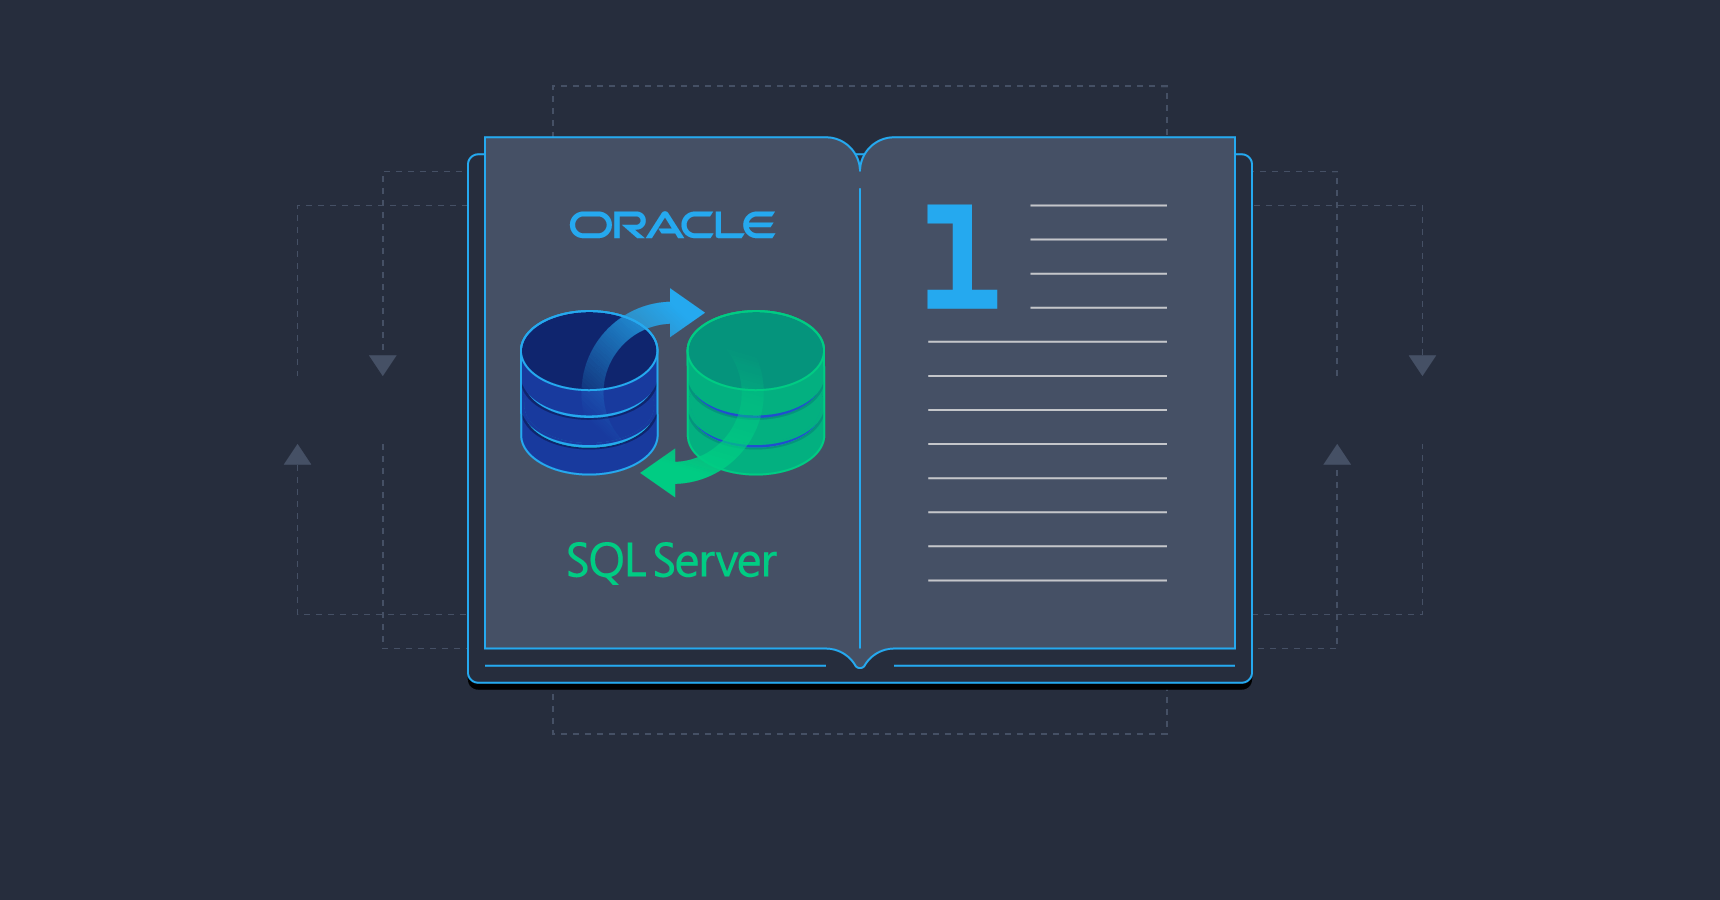 Oracle to SQL Server and SQL Server to Oracle Migration Guide